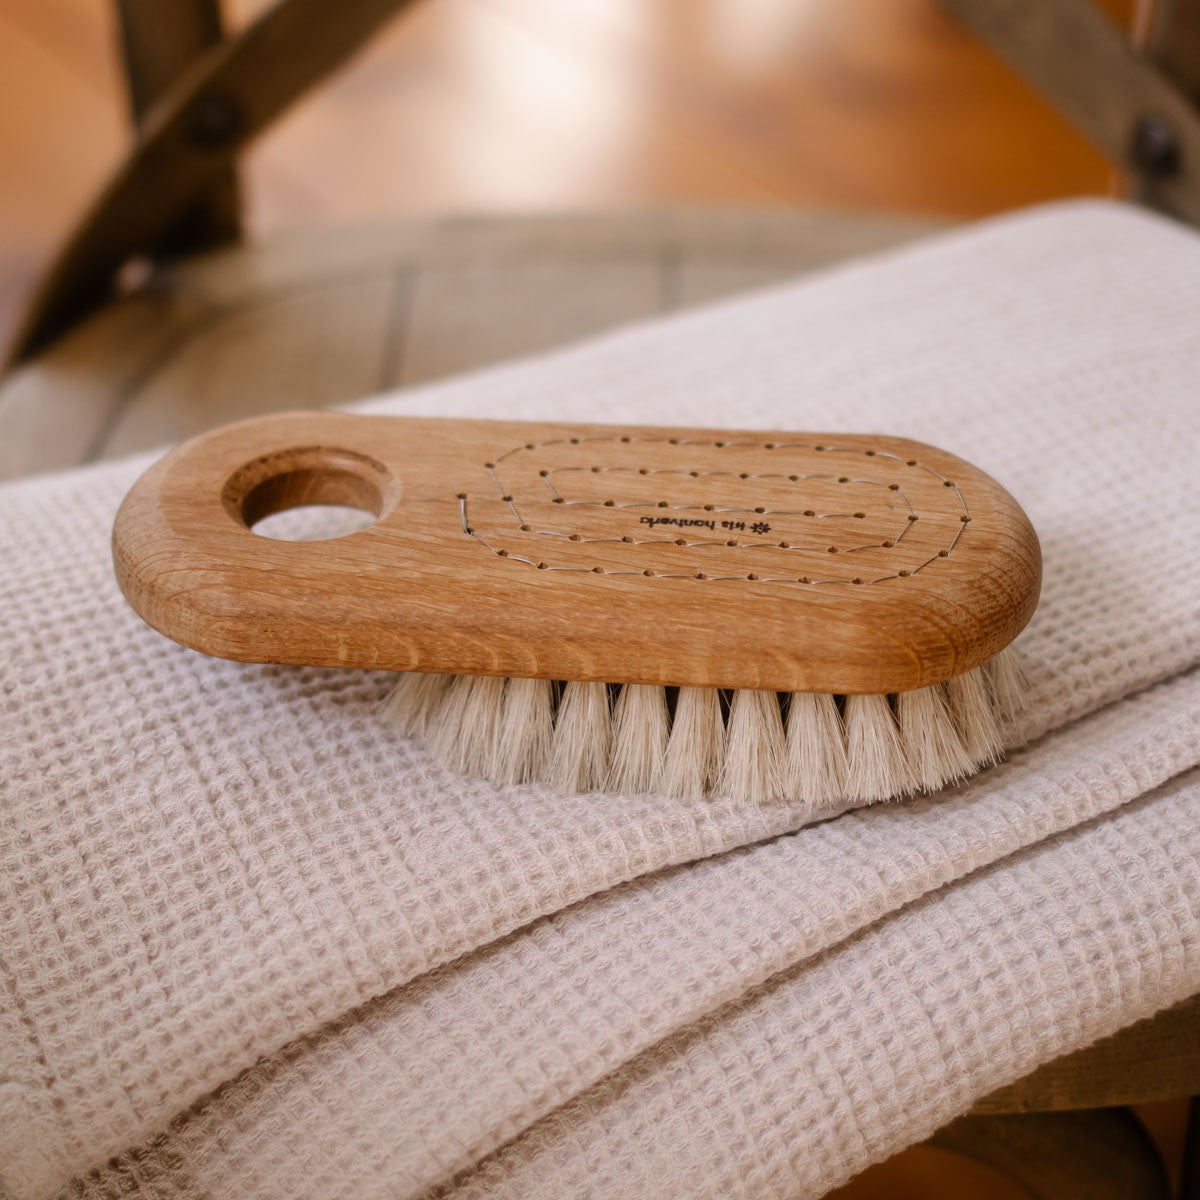 A Body Brush - Firm from Iris Hantverk sits on top of a white towel.